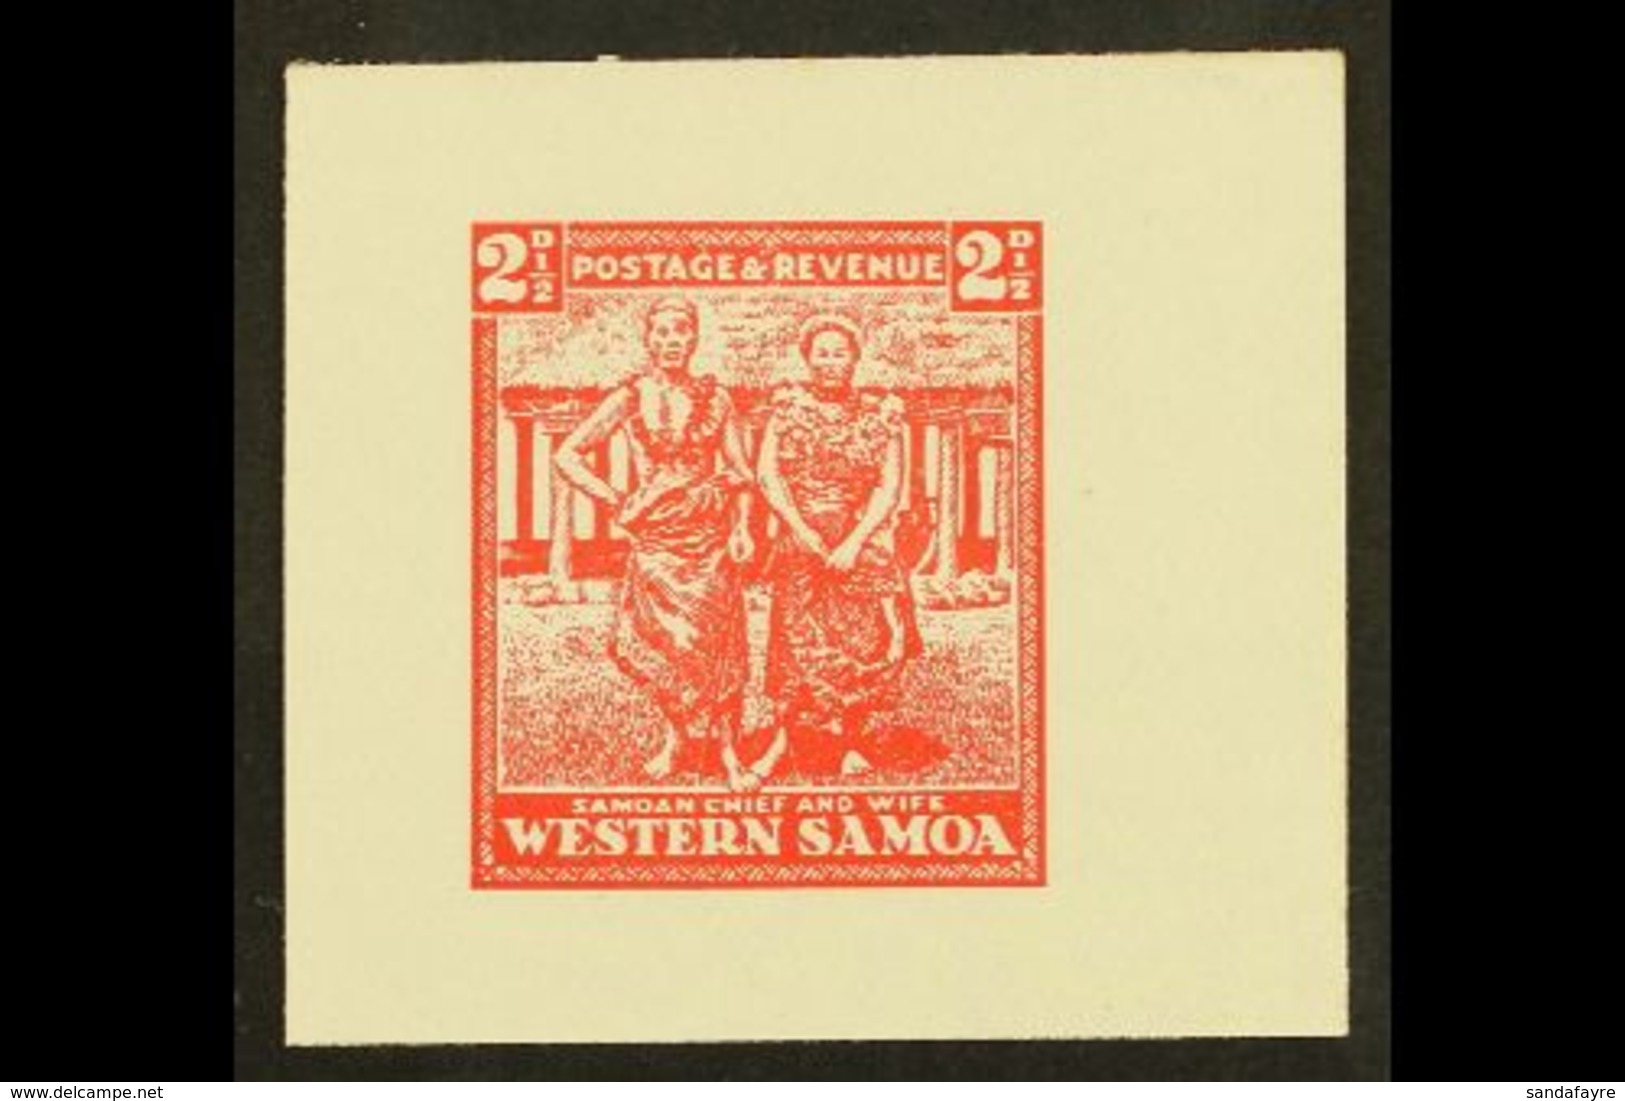 1935 PICTORIAL DEFINITIVE ESSAY Collins Essay For The 2½d Value In Red On Thick White Paper, The "Chief And Wife" Design - Samoa (Staat)